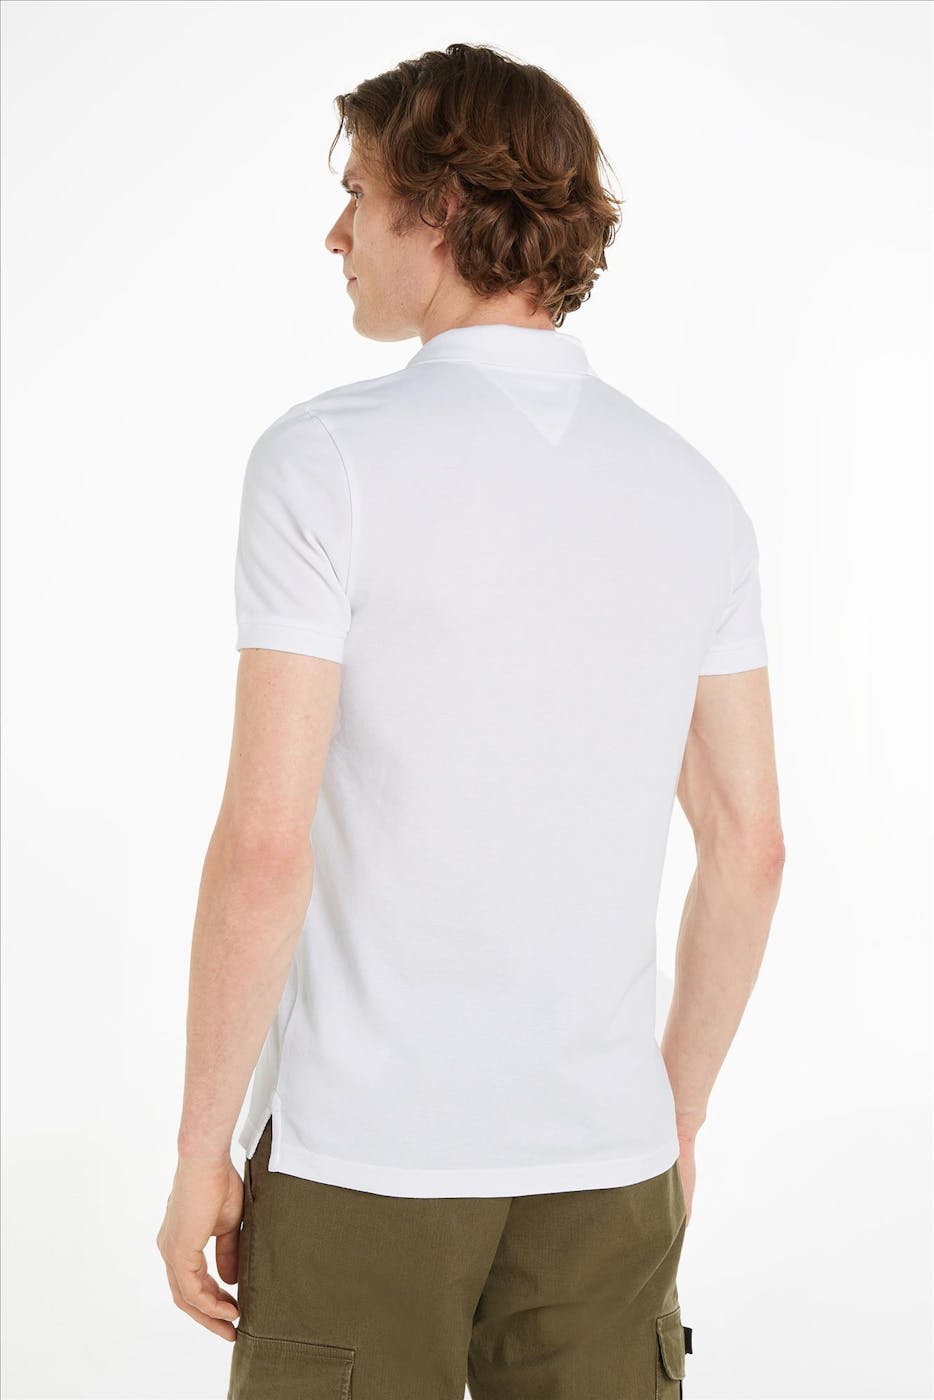 Tommy Jeans - Witte Slim Placket polo